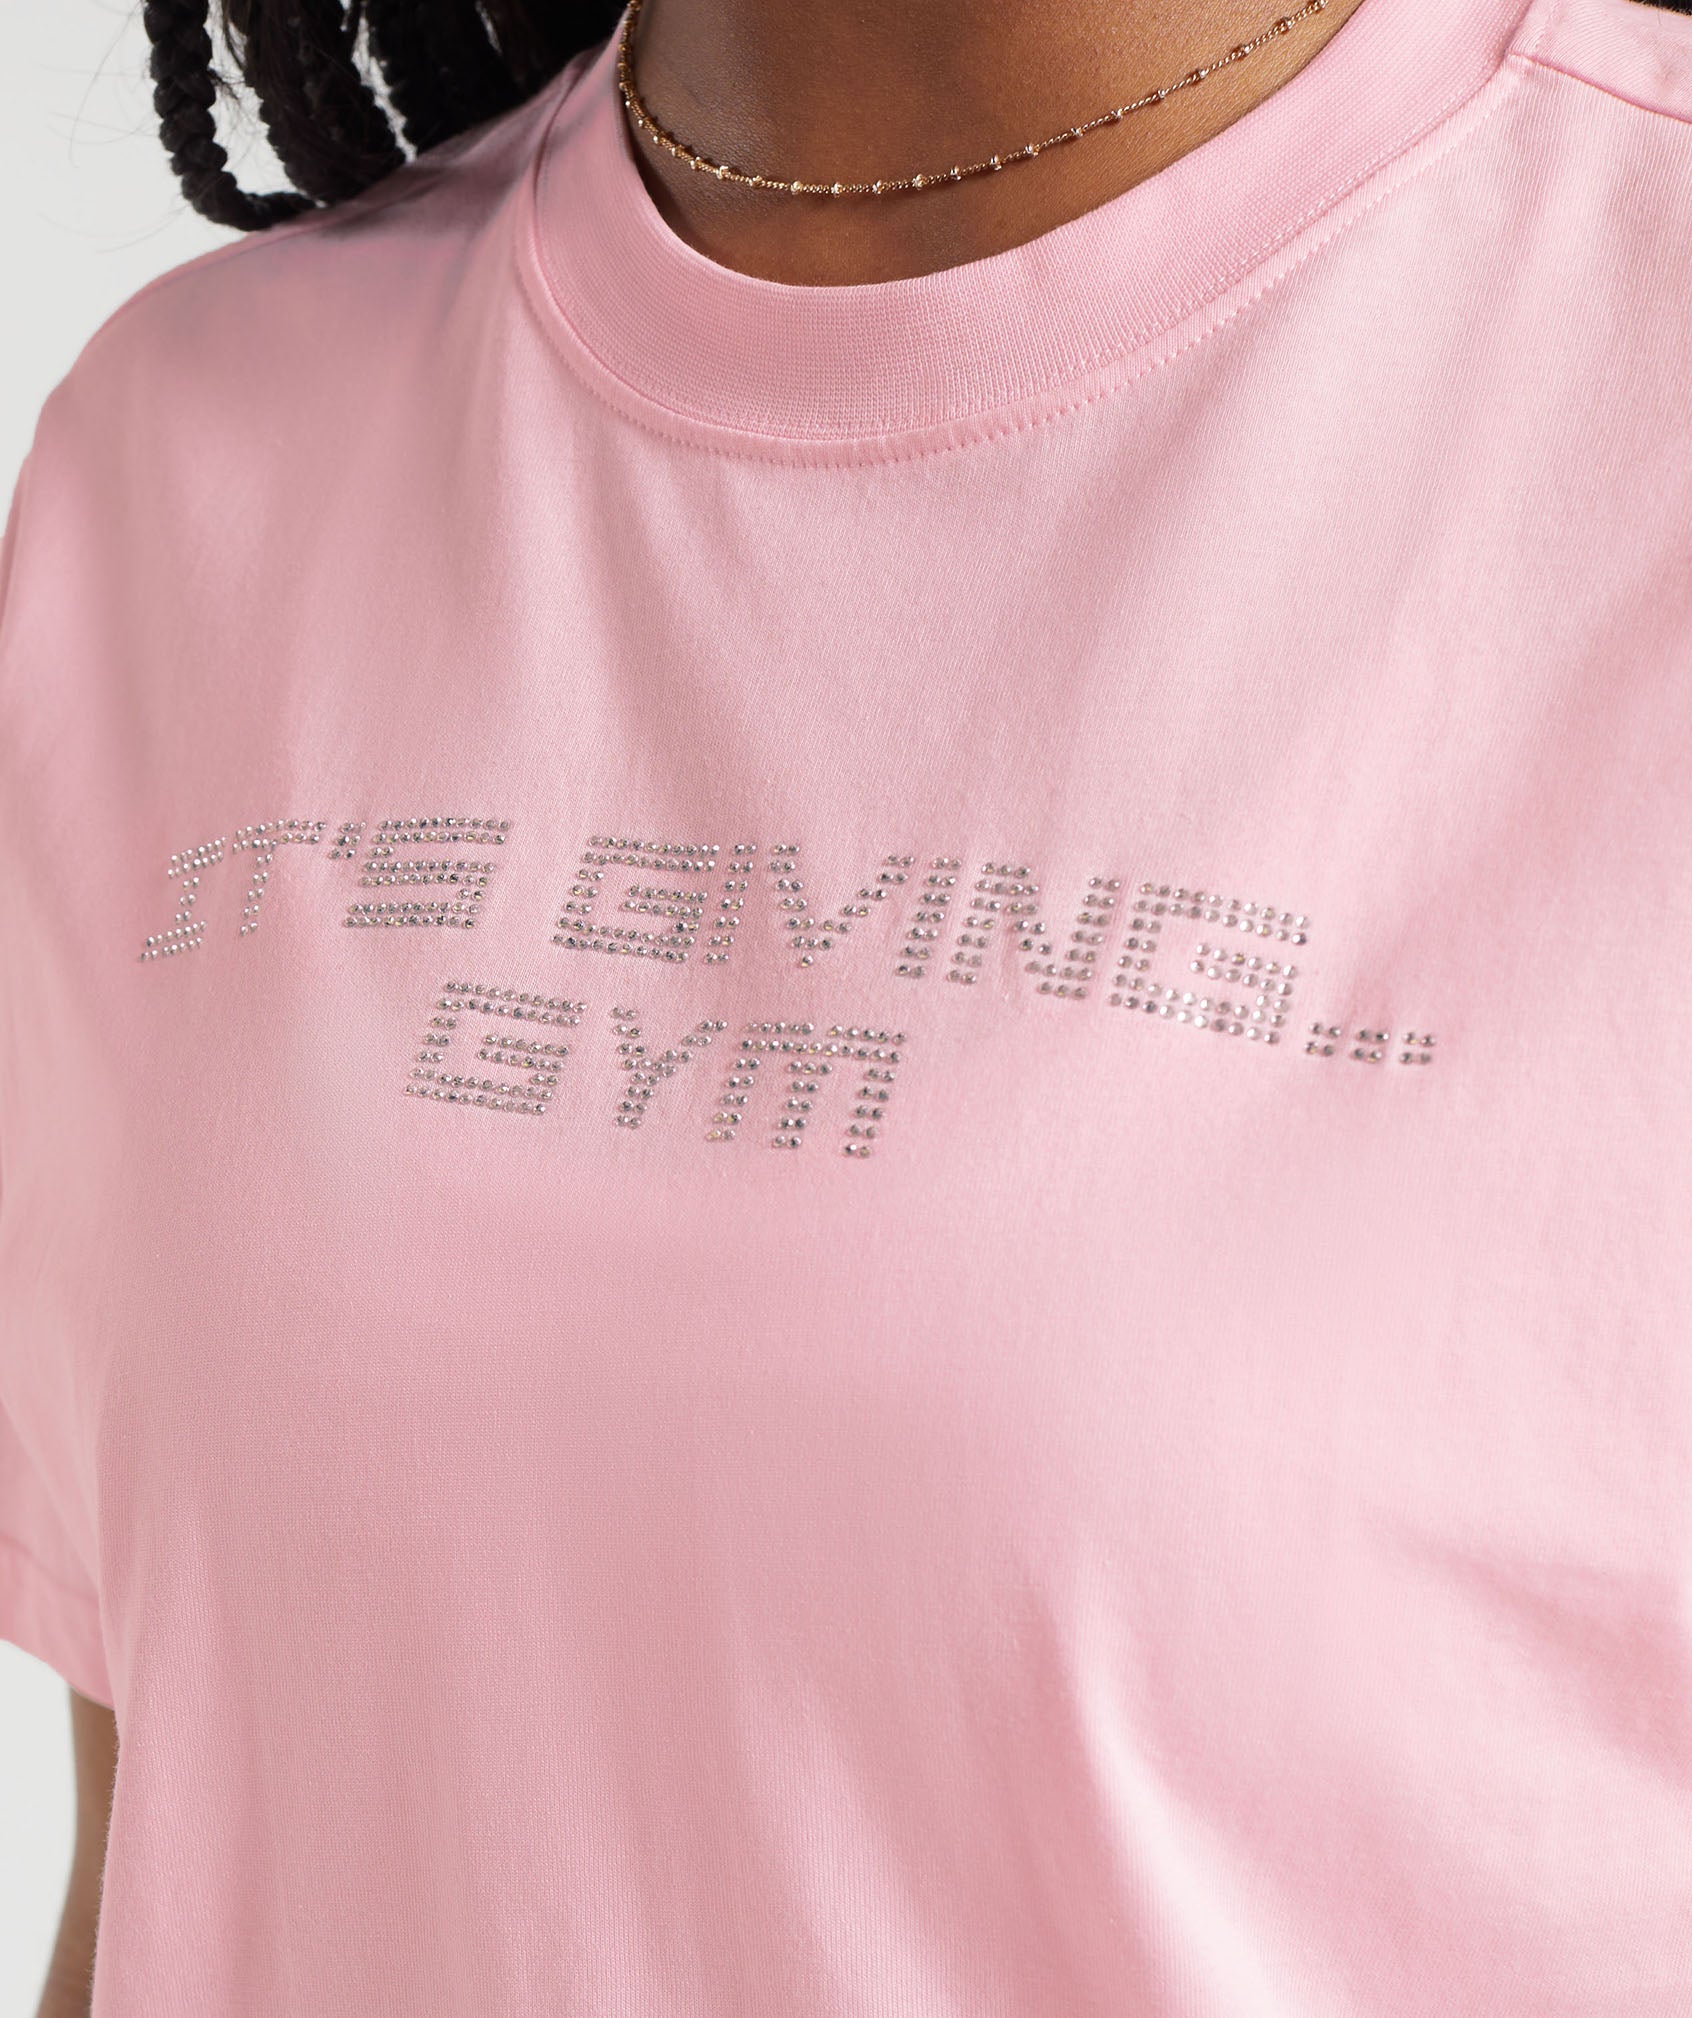 Its Giving Gym Oversized T-Shirt in Dolly Pink - view 4